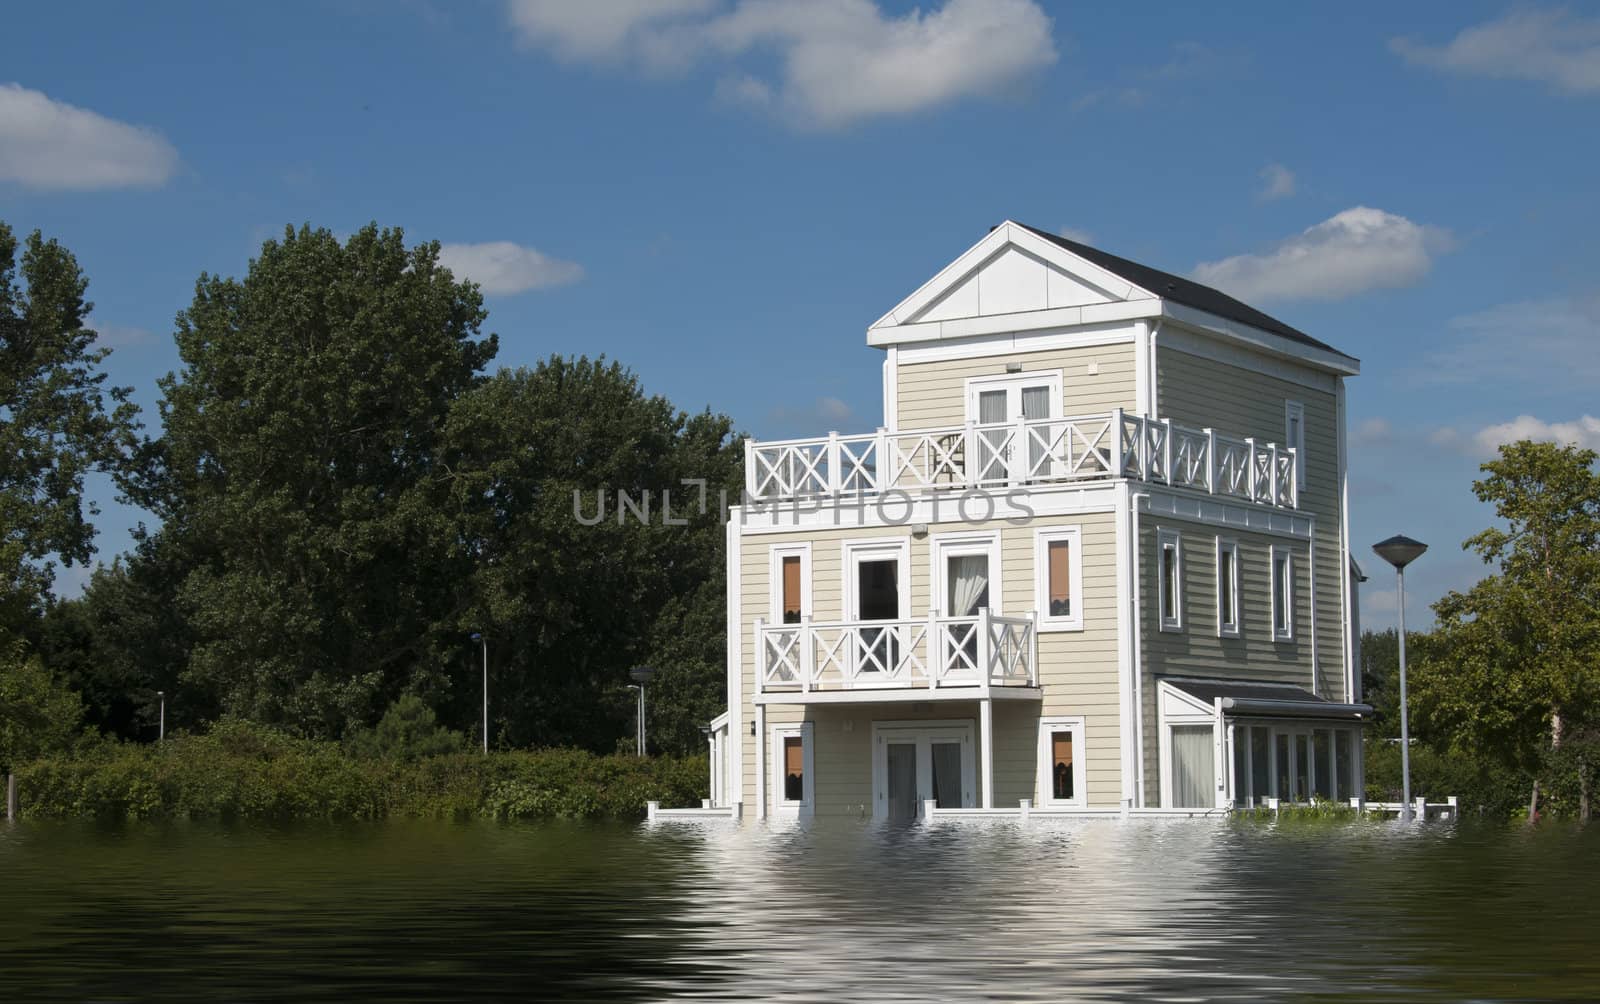 big wooden house with blue sky and white clouds in high water